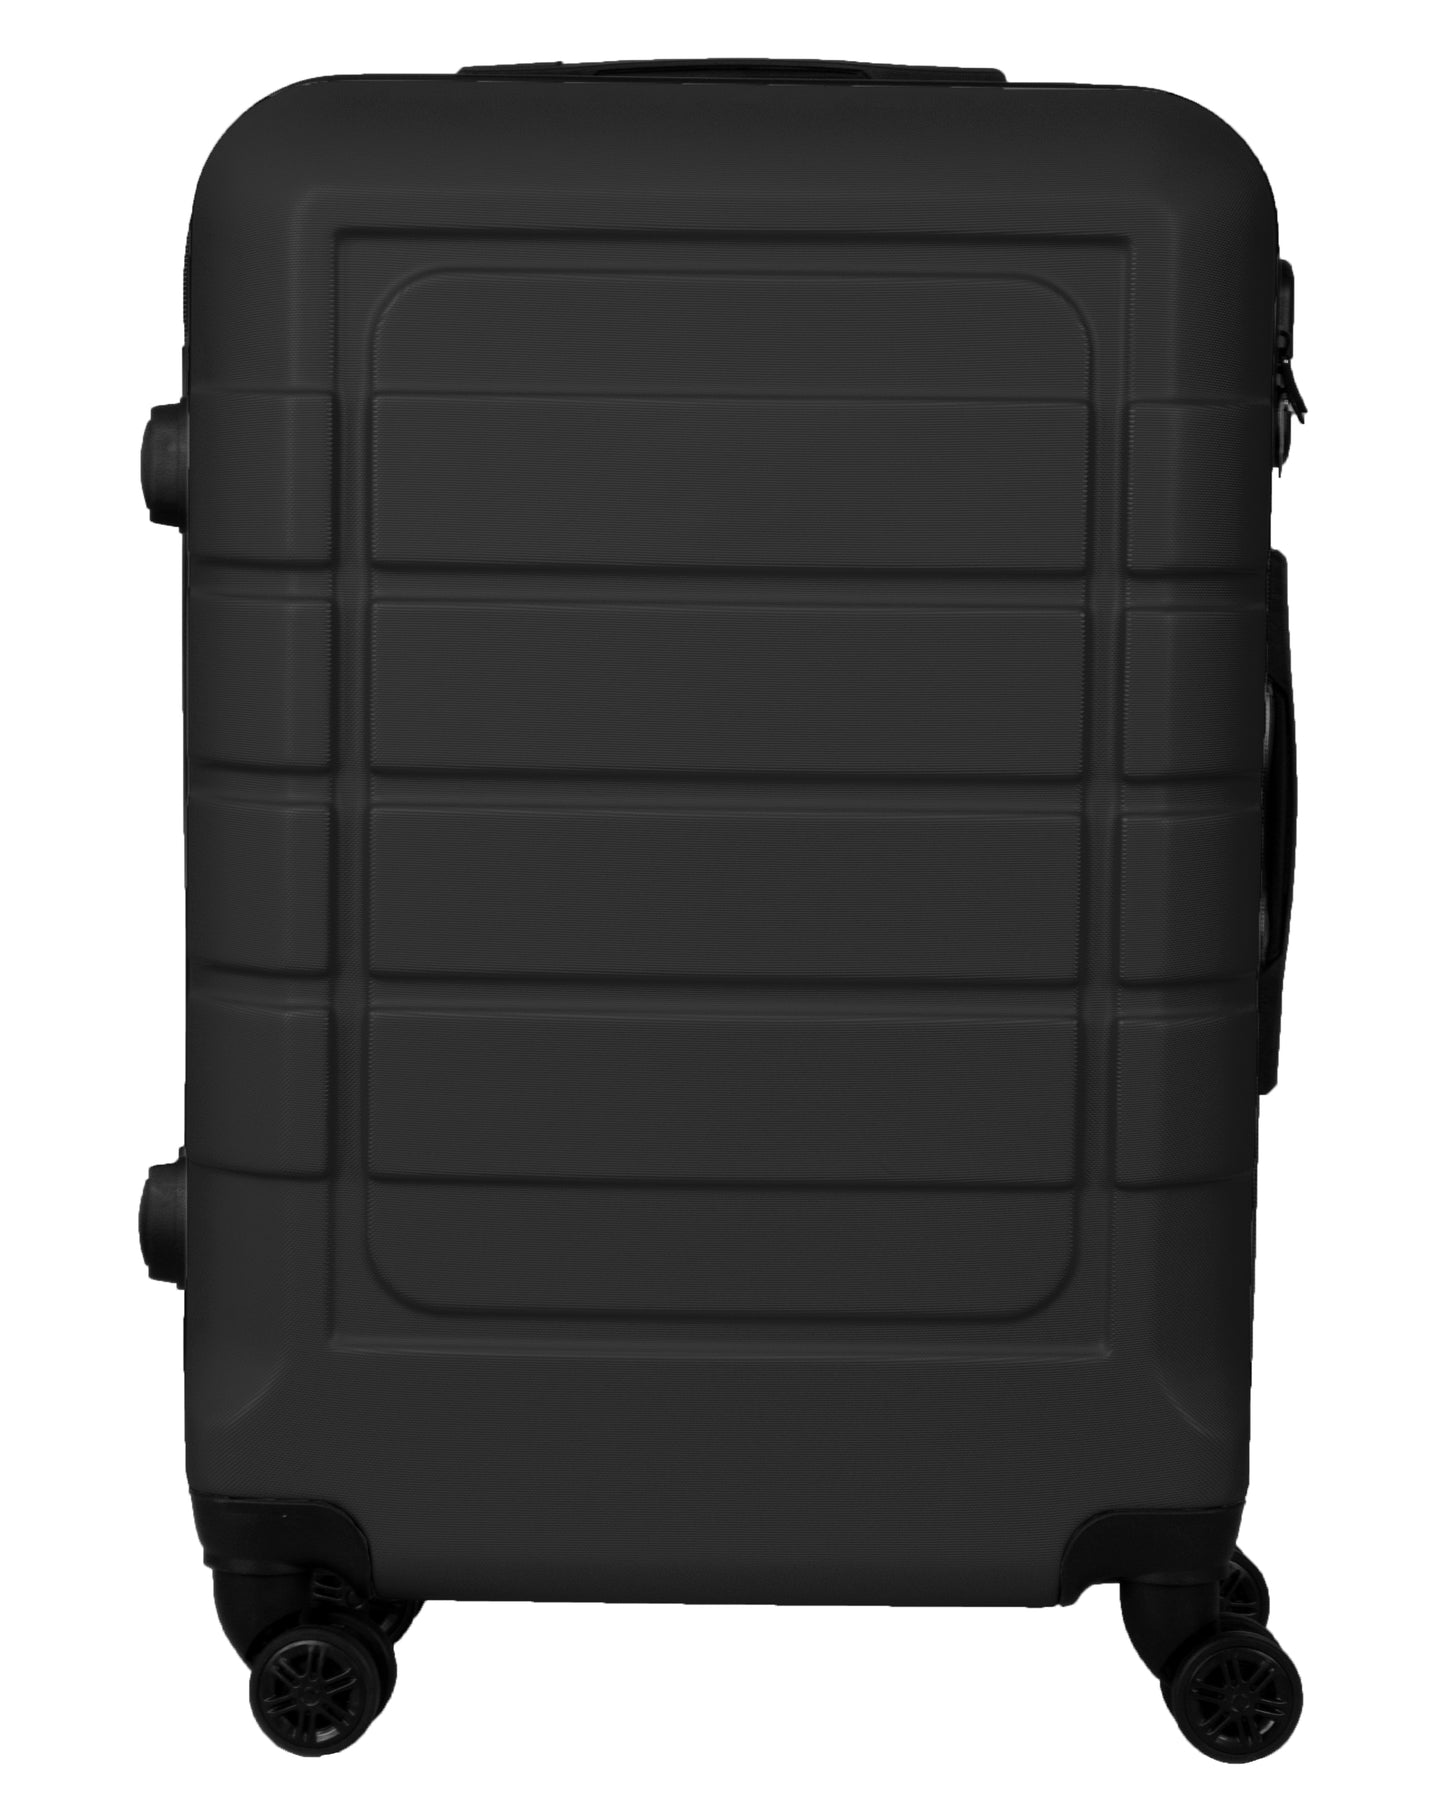 Hard Shell Suitcase with 4 Spinner Wheels, Black